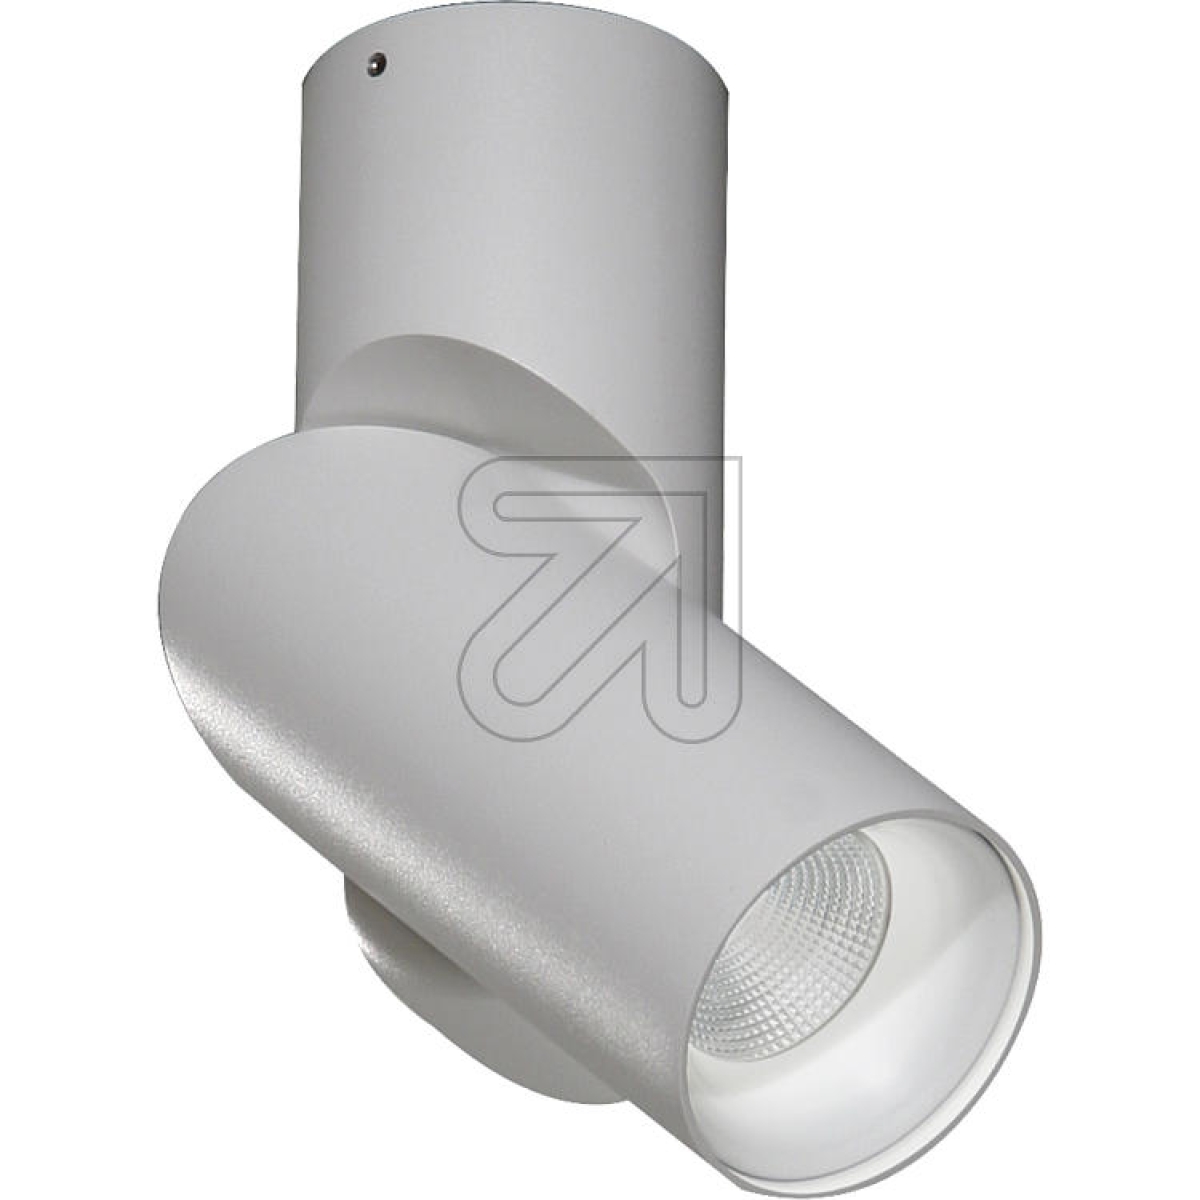 BÖHMERLED surface-mounted light white IP20 3000K 9W 44296Article-No: 630740